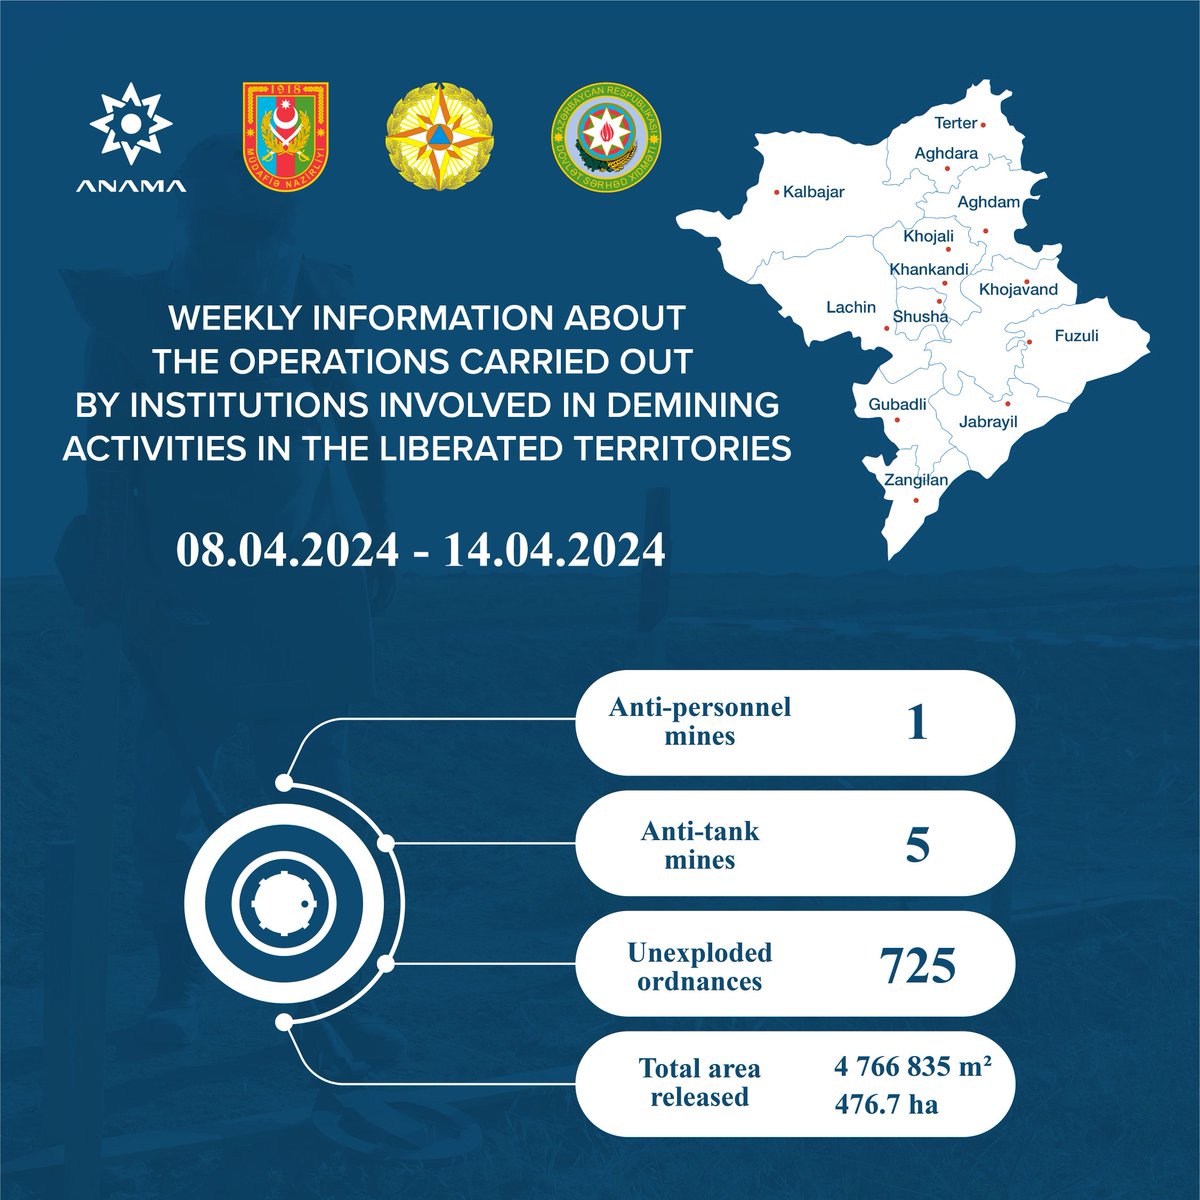 Weekly information about operations carried out by institutions involved in demining activities in the liberated territories (08.04.2024 - 14.04.2024)

#ANAMA #Minatəmizləmə #MineAwareness #MineAction #LandmineSafety #Azerbaijan #Karabakh